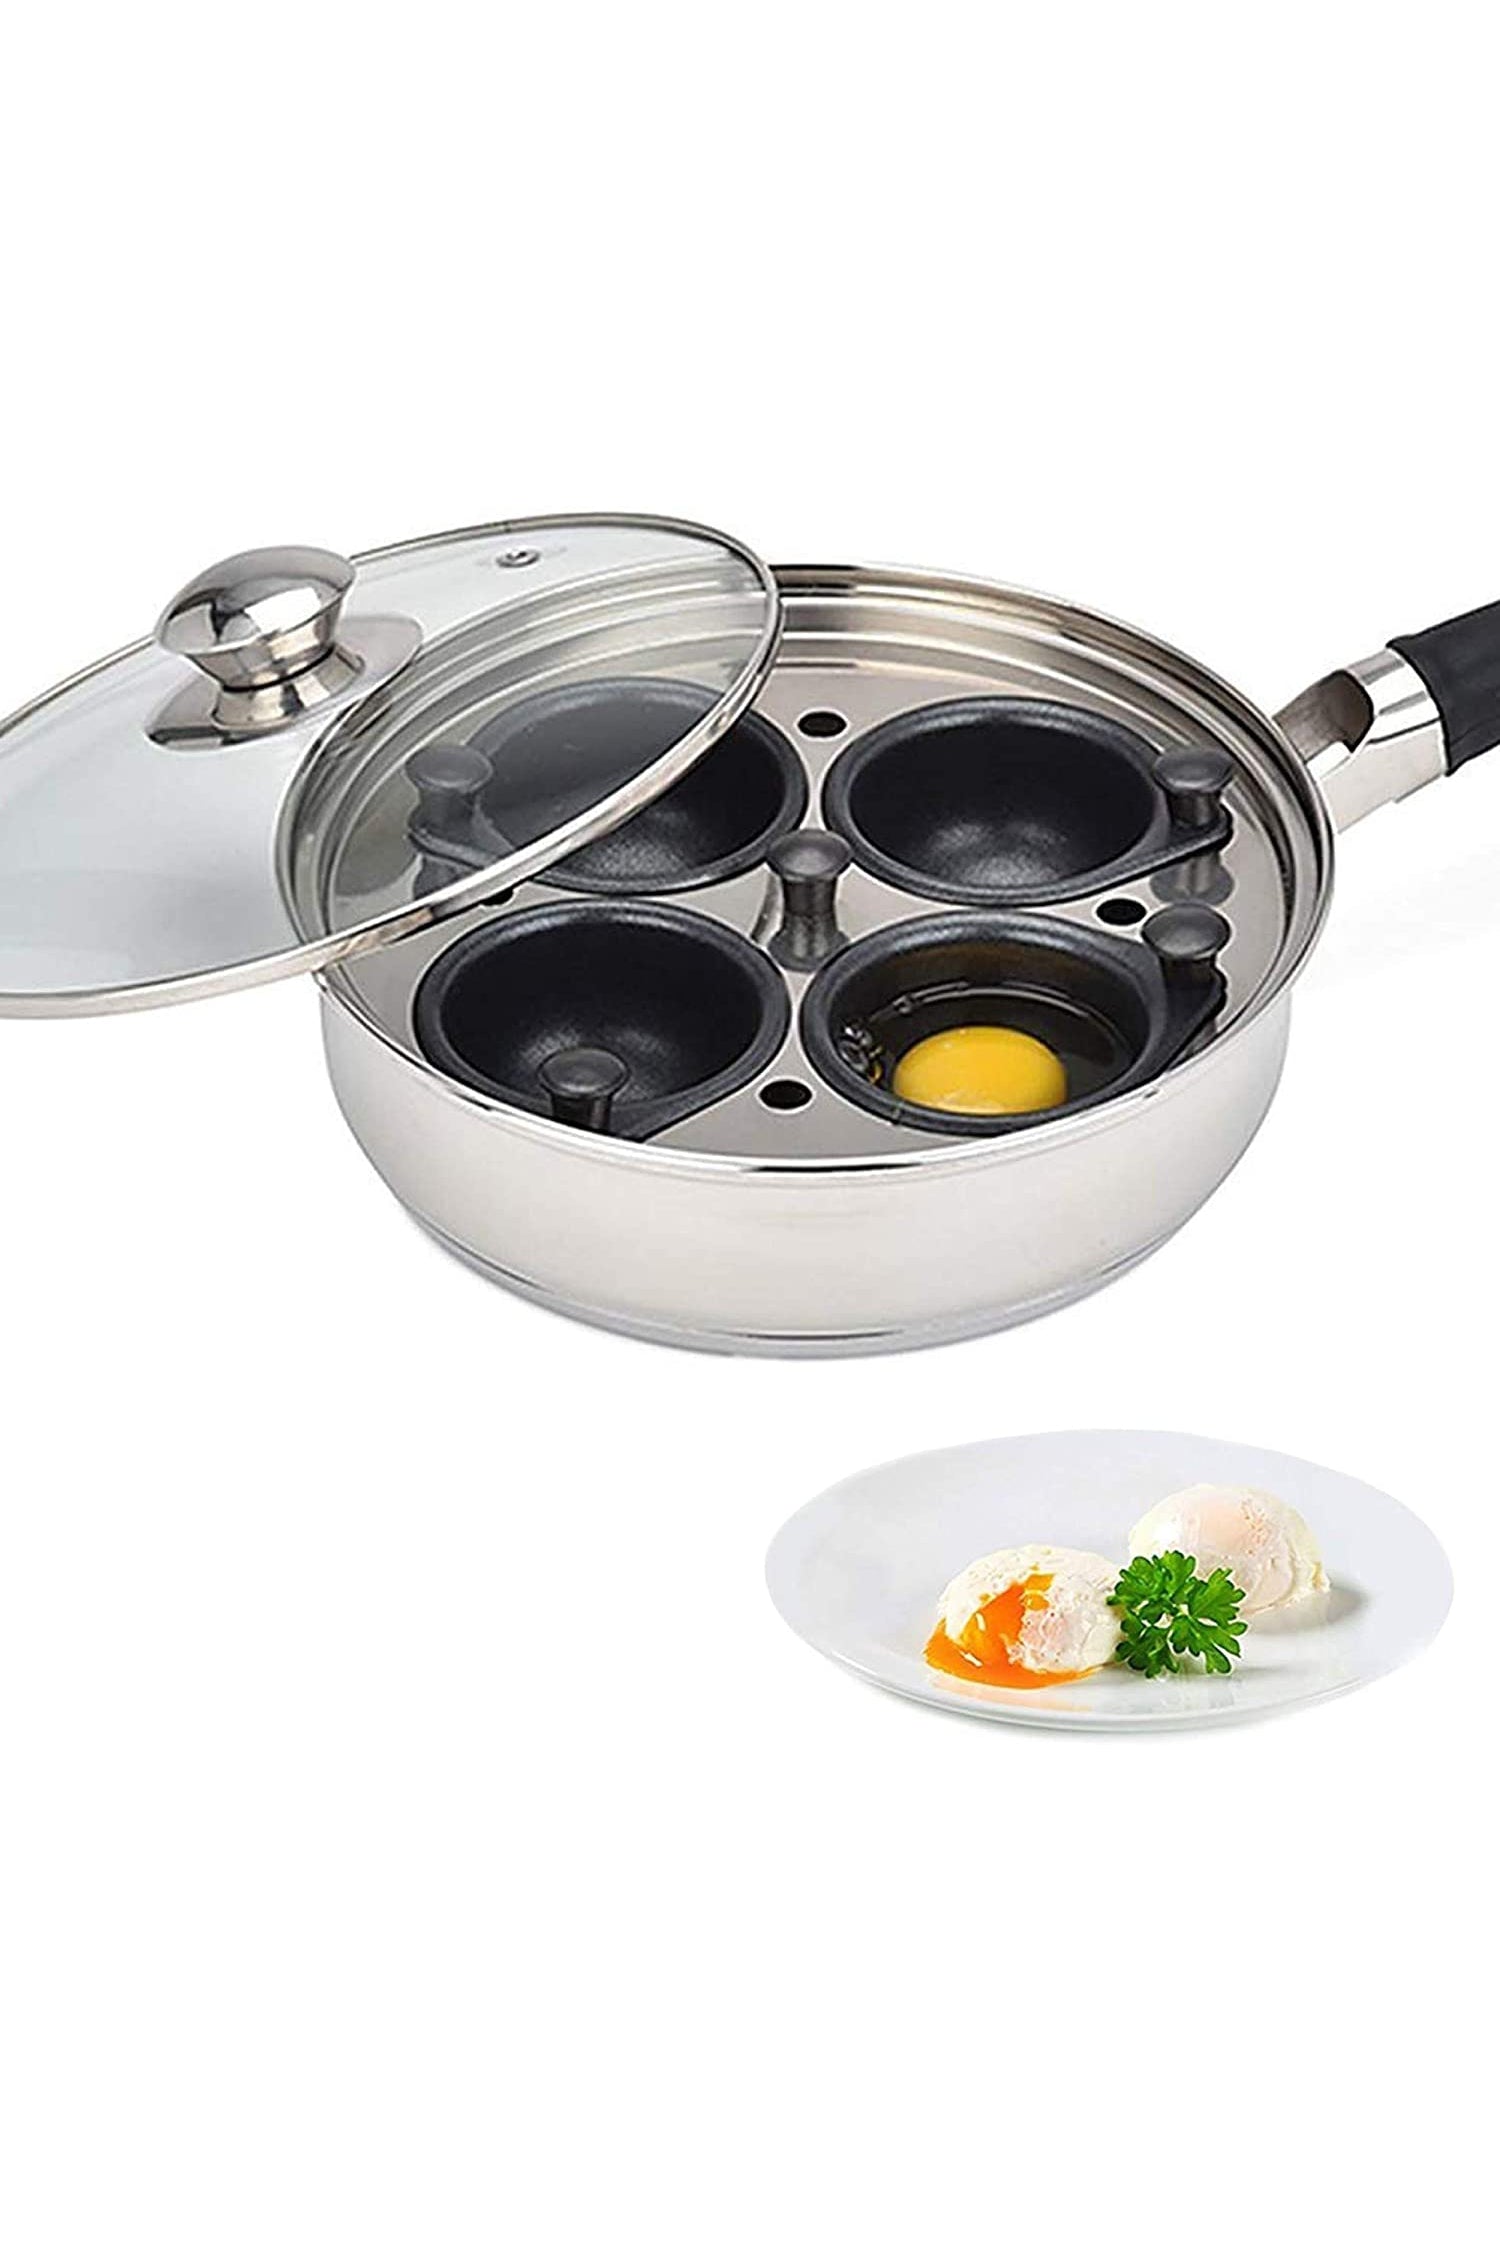 Modern Innovations Stainless Steel Egg Poacher Pan Set with 4 Nonstick Egg  Poacher Insert Cups, Silicone Handle, Glass Lid and Removable Tray for